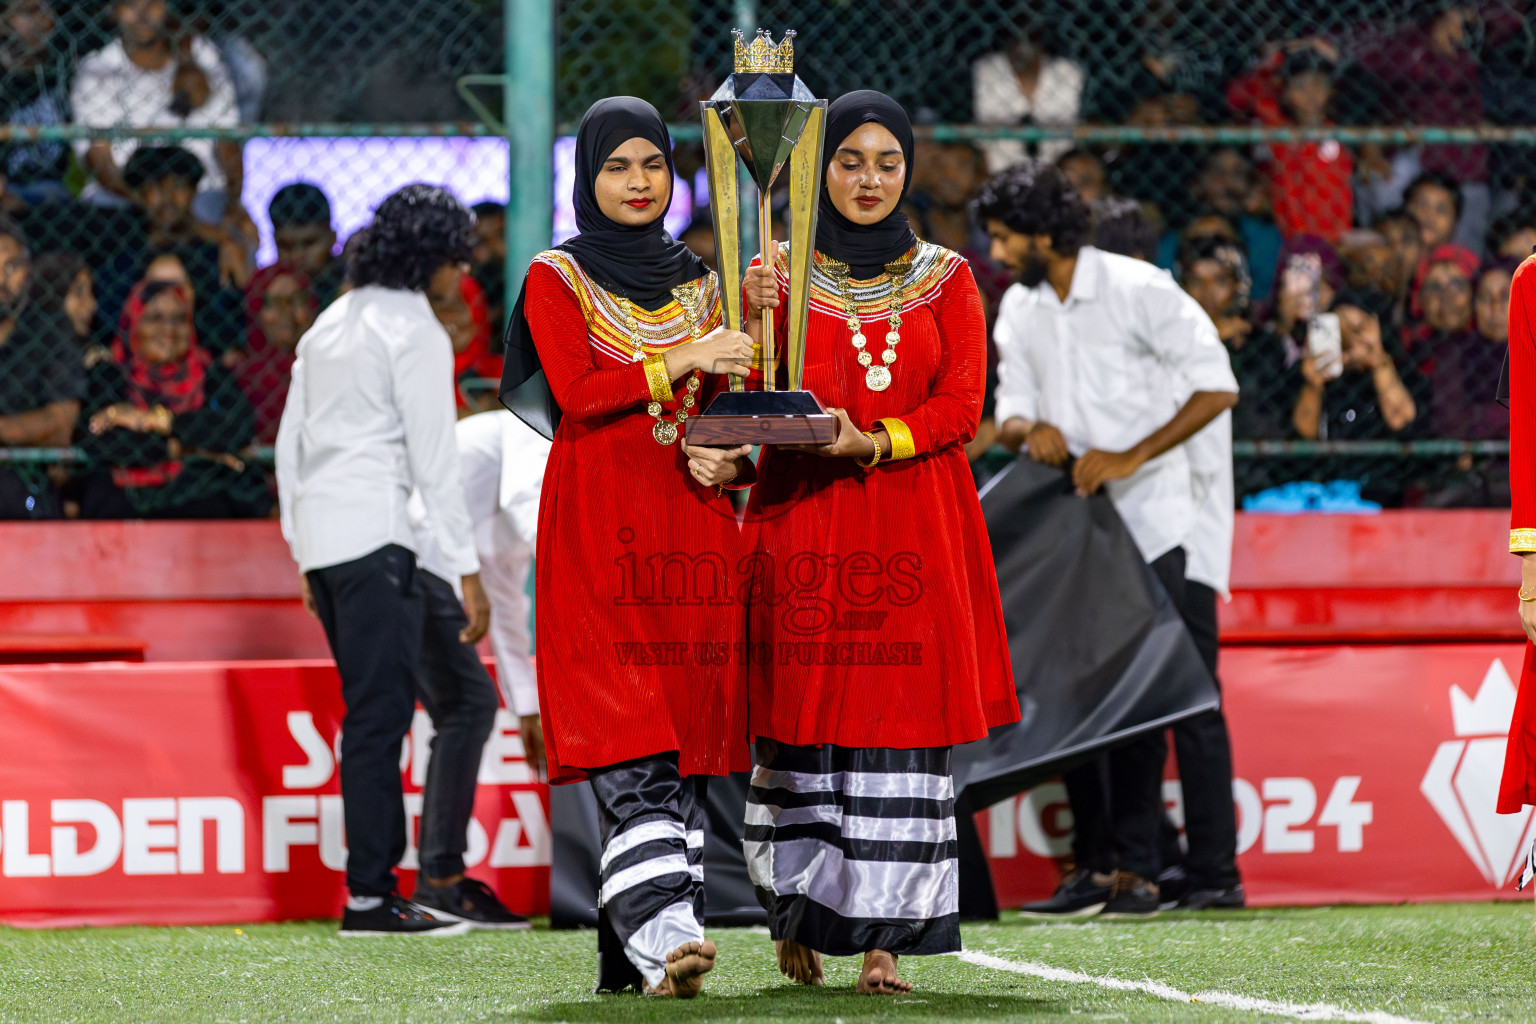 L. Gan VS B. Eydhafushi in the Finals of Golden Futsal Challenge 2024 which was held on Thursday, 7th March 2024, in Hulhumale', Maldives. 
Photos: Hassan Simah / images.mv